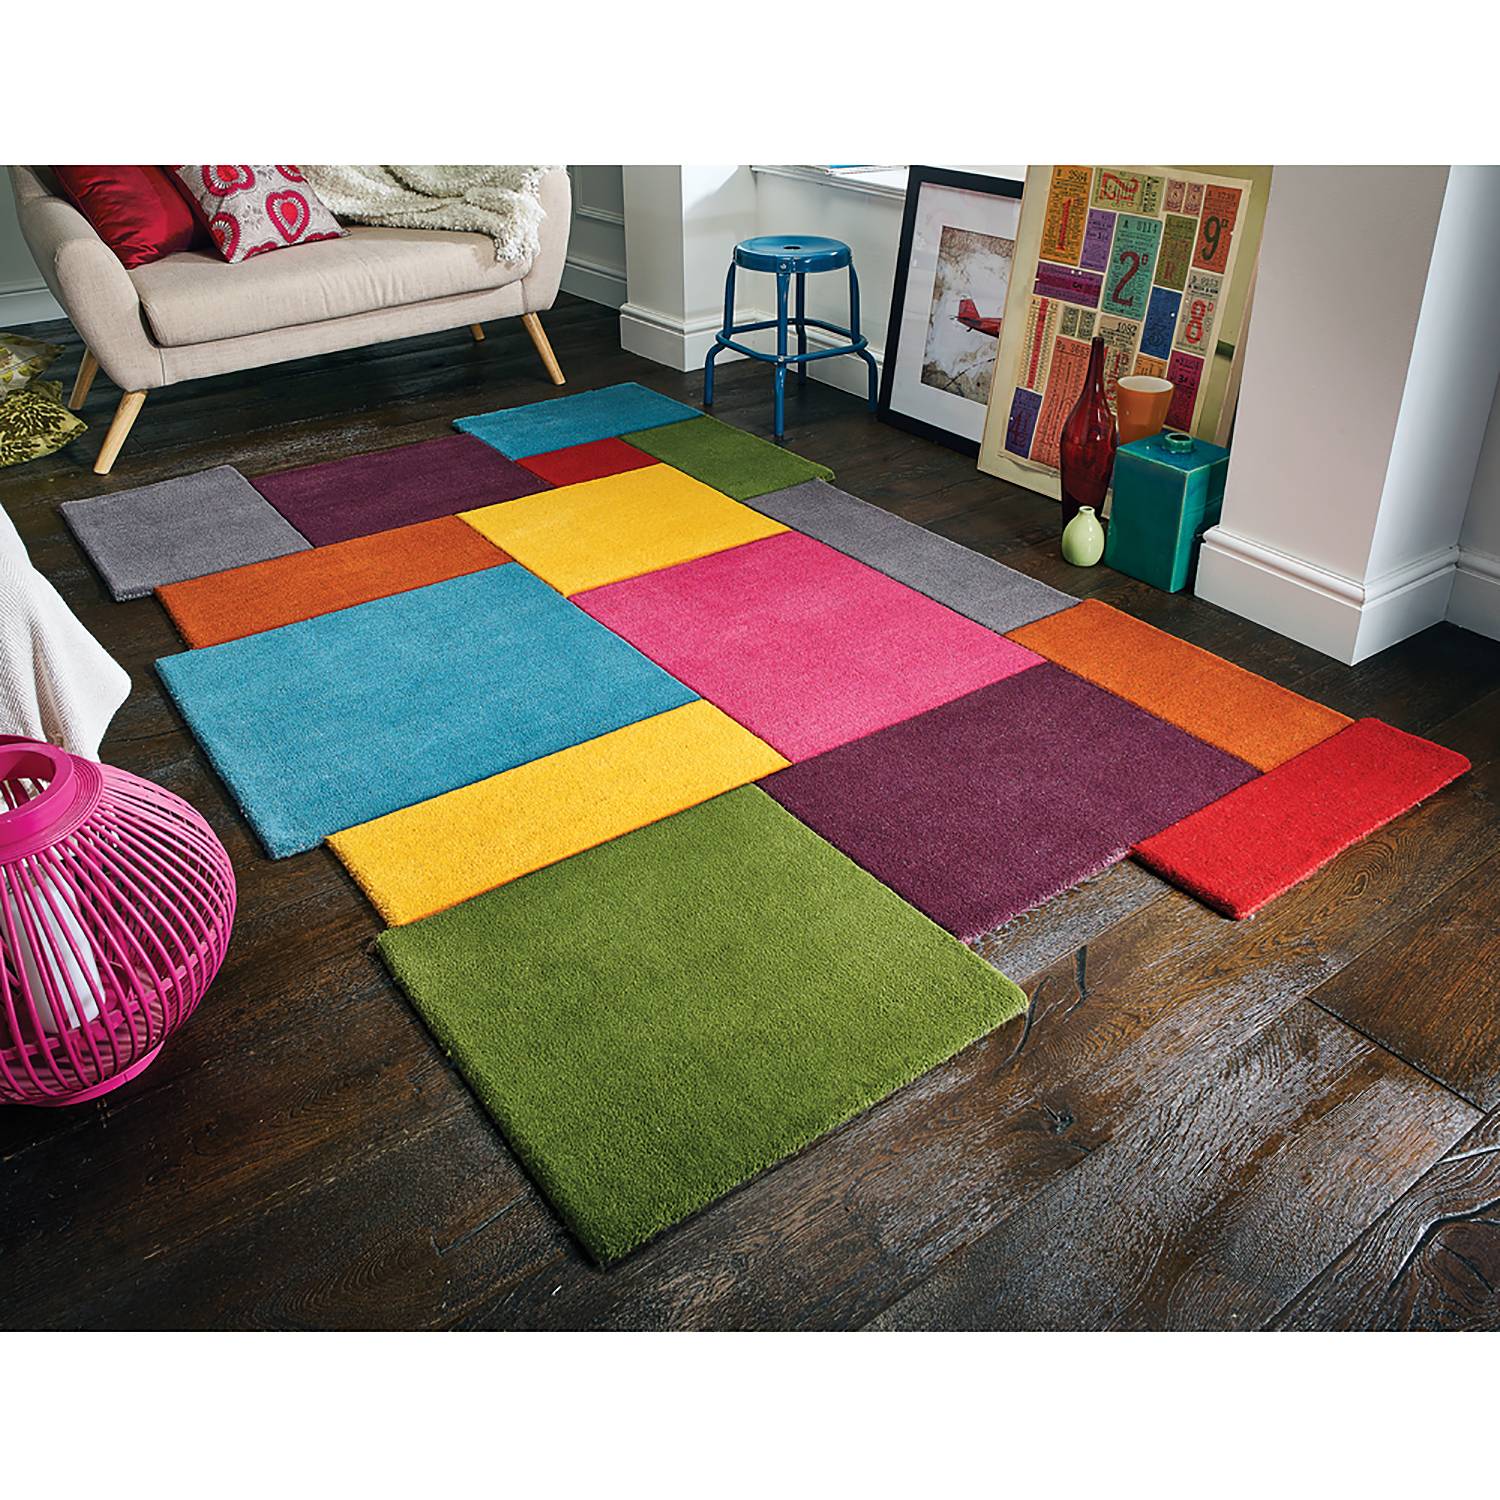 Image of Tapis en laine Collage 000000001000230120